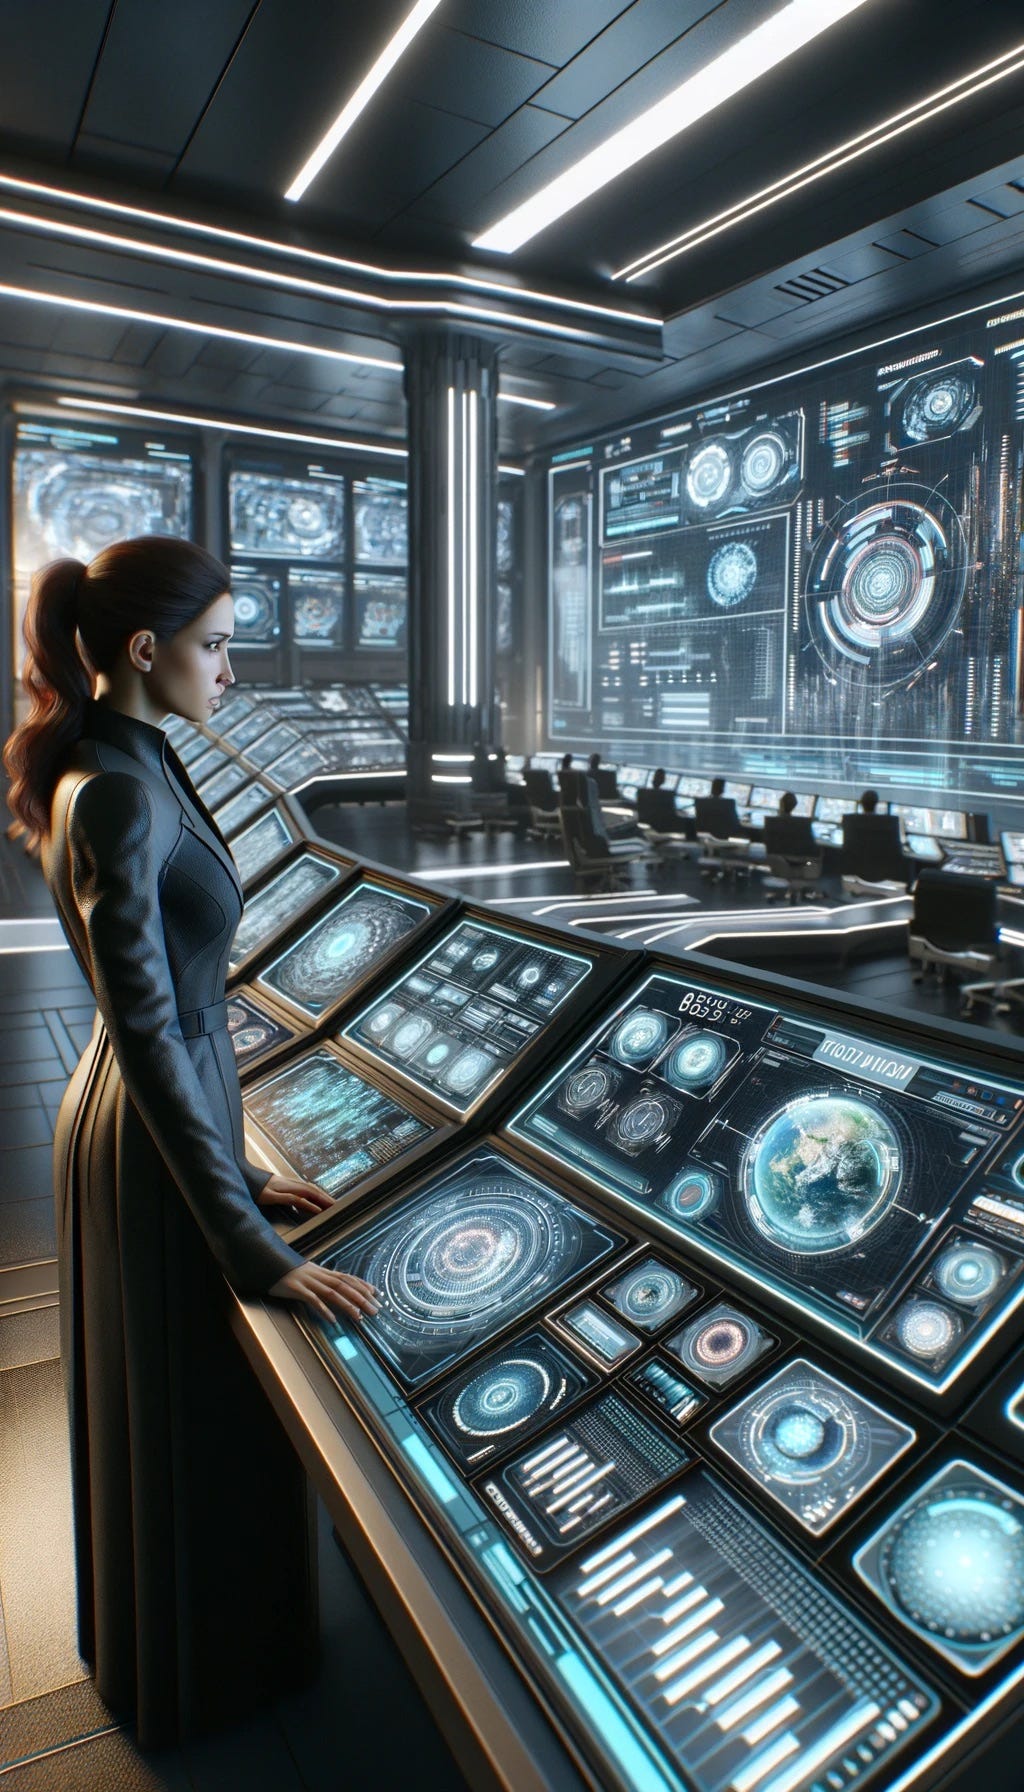 A futuristic city’s control center, with a woman, Valeria, observing various futuristic screens displaying infographics and dynamic models. The interior should reflect a high-tech environment with a sleek design, suggesting advanced AI governance. The screens show complex data visualizations that hint at anomalies and imperfections. Valeria appears contemplative and uneasy, her expression one of concern as she studies the displays. Image 1